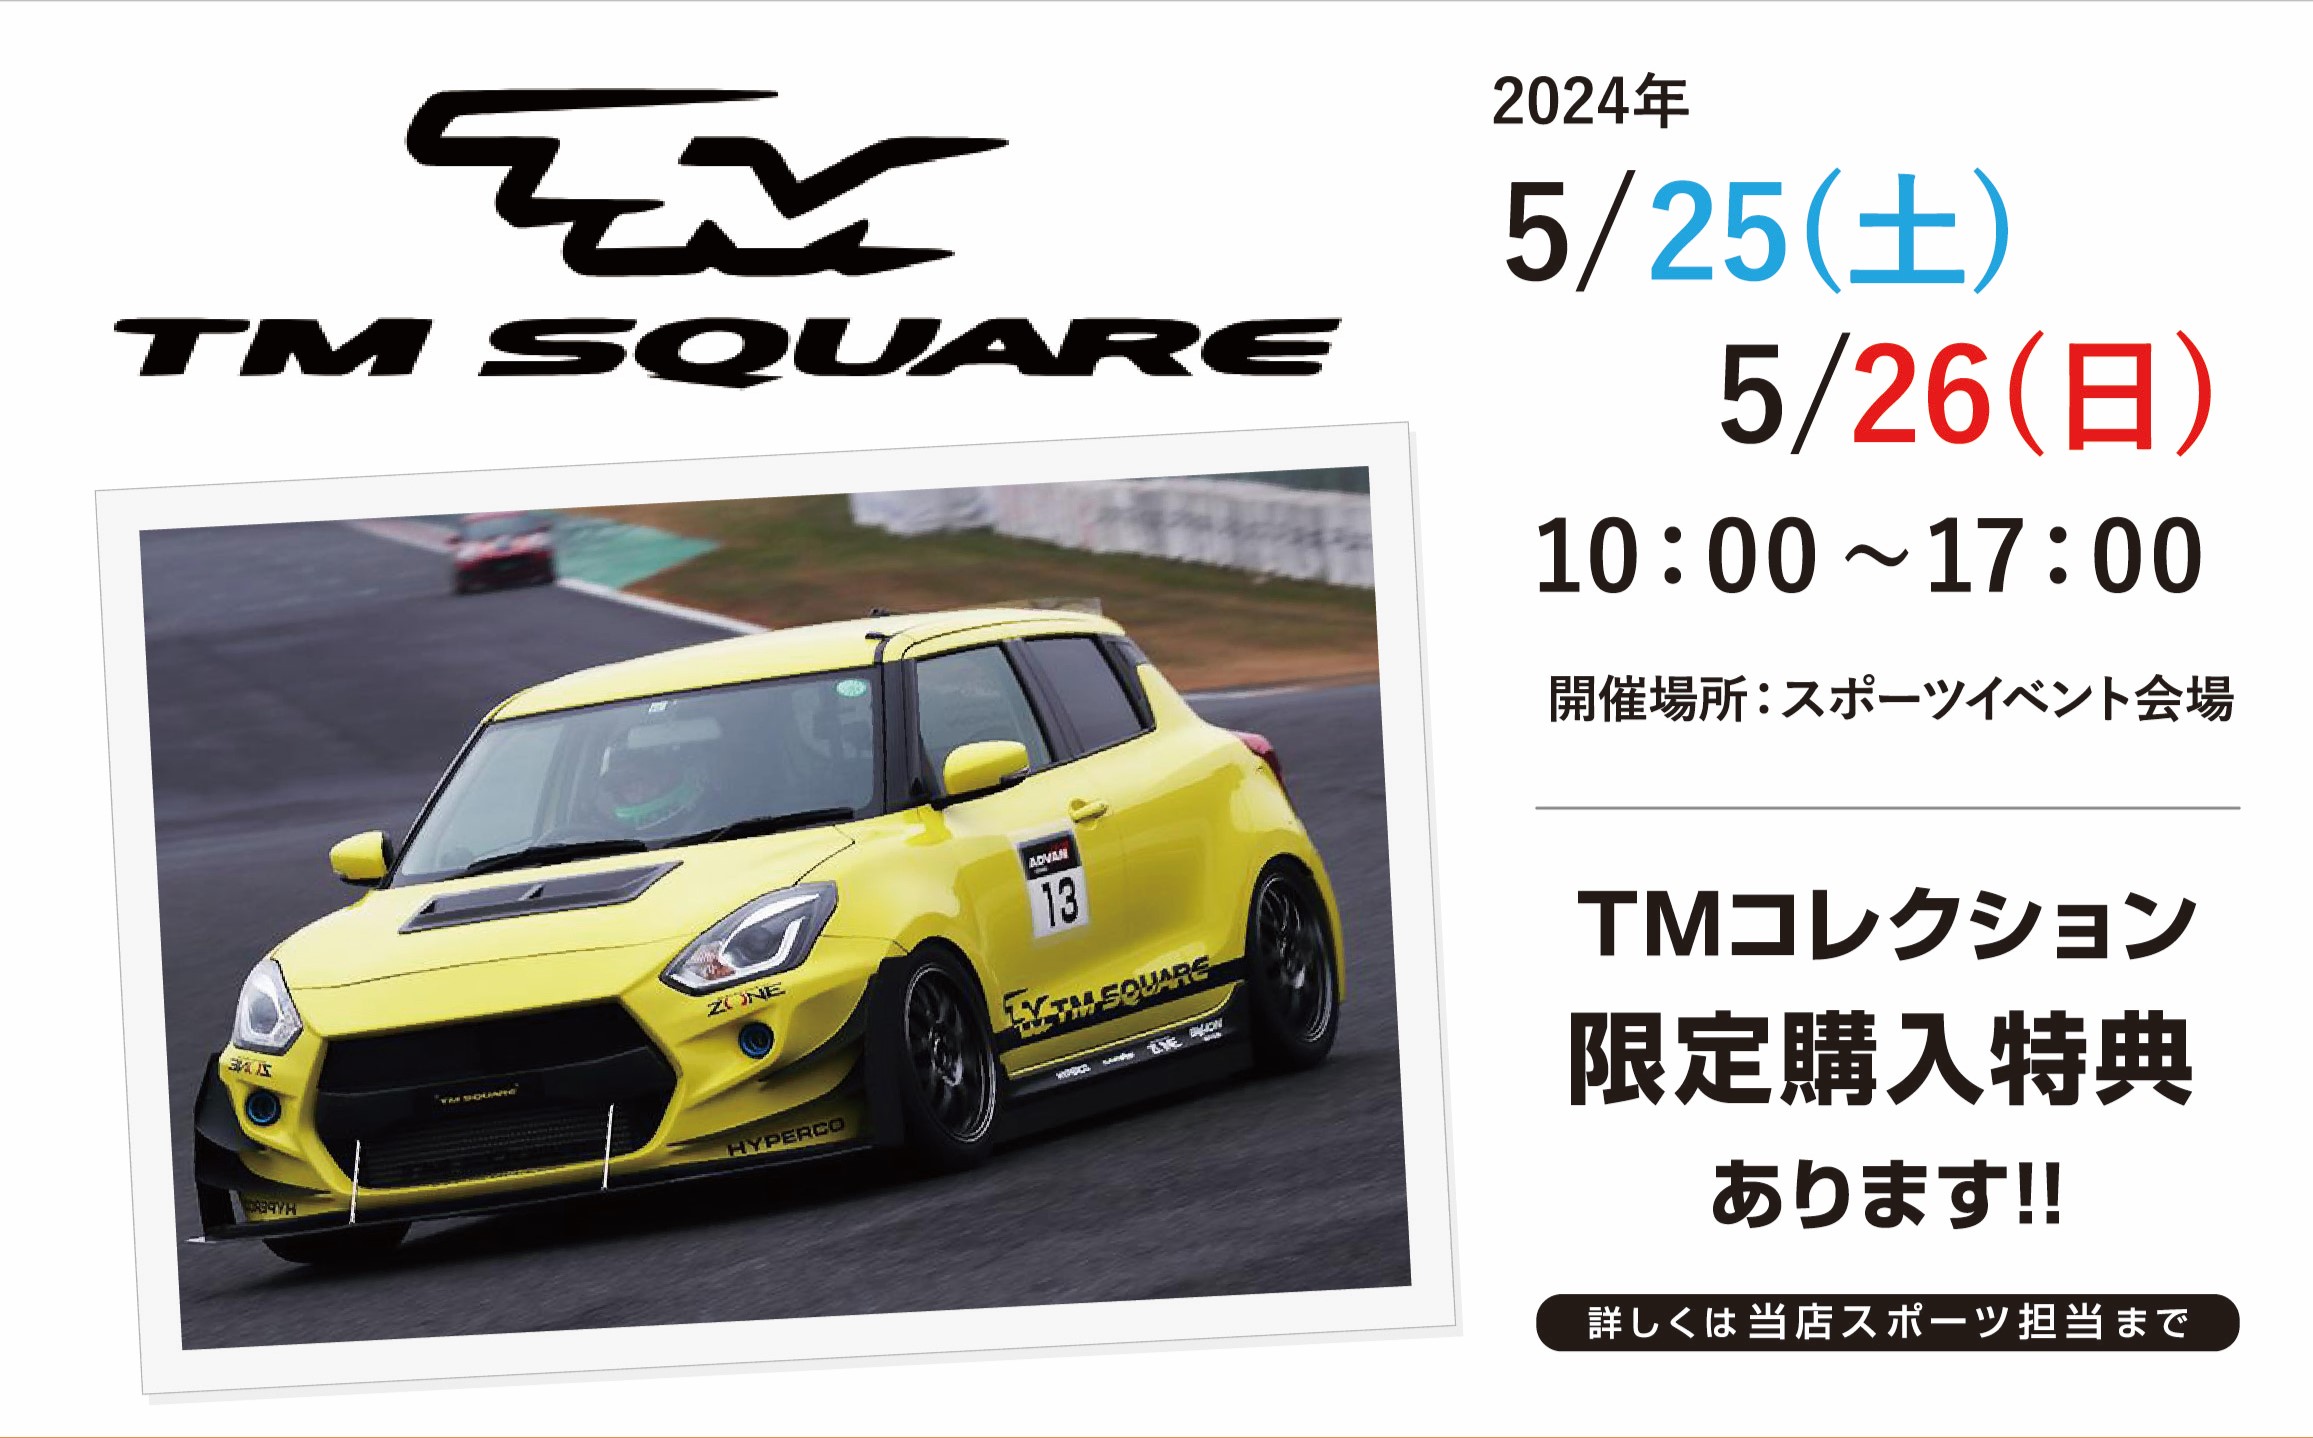 5/25-26『 TM Collection 2024 』 今年も開催!!